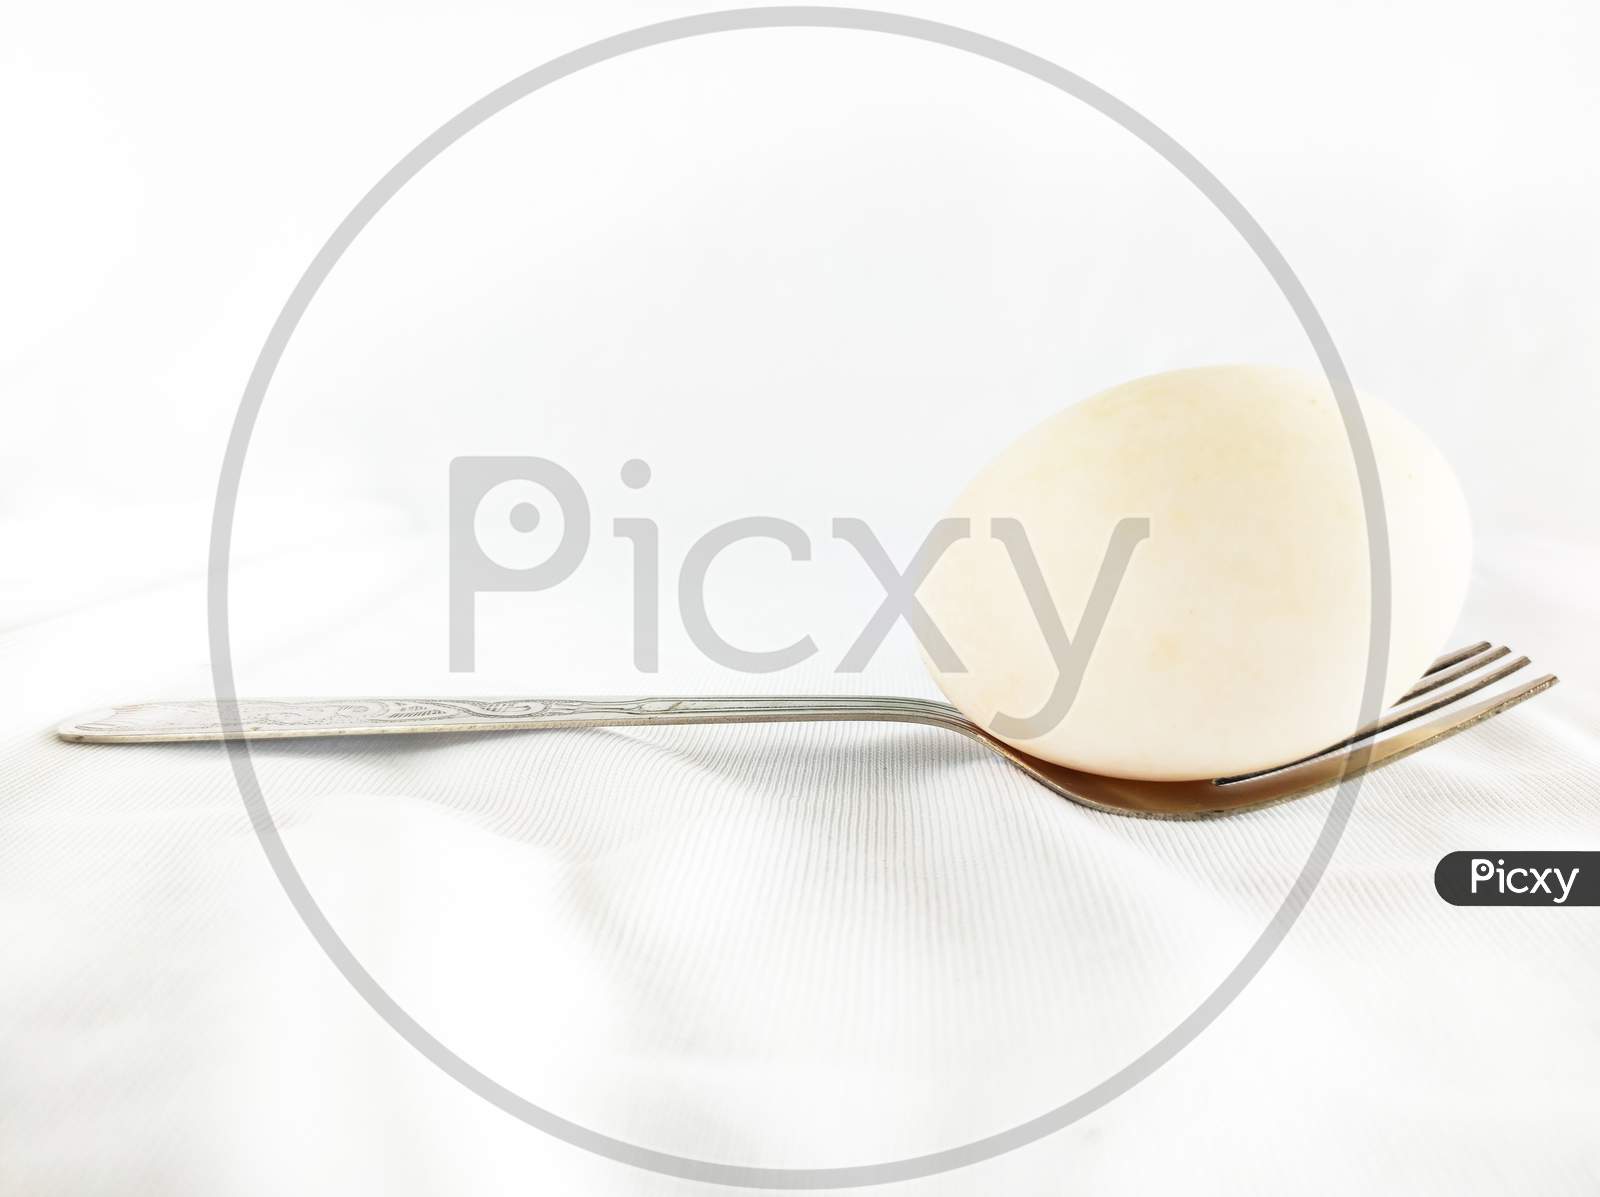 An Egg Picked Up In A Fork On Top Of A White Cloth